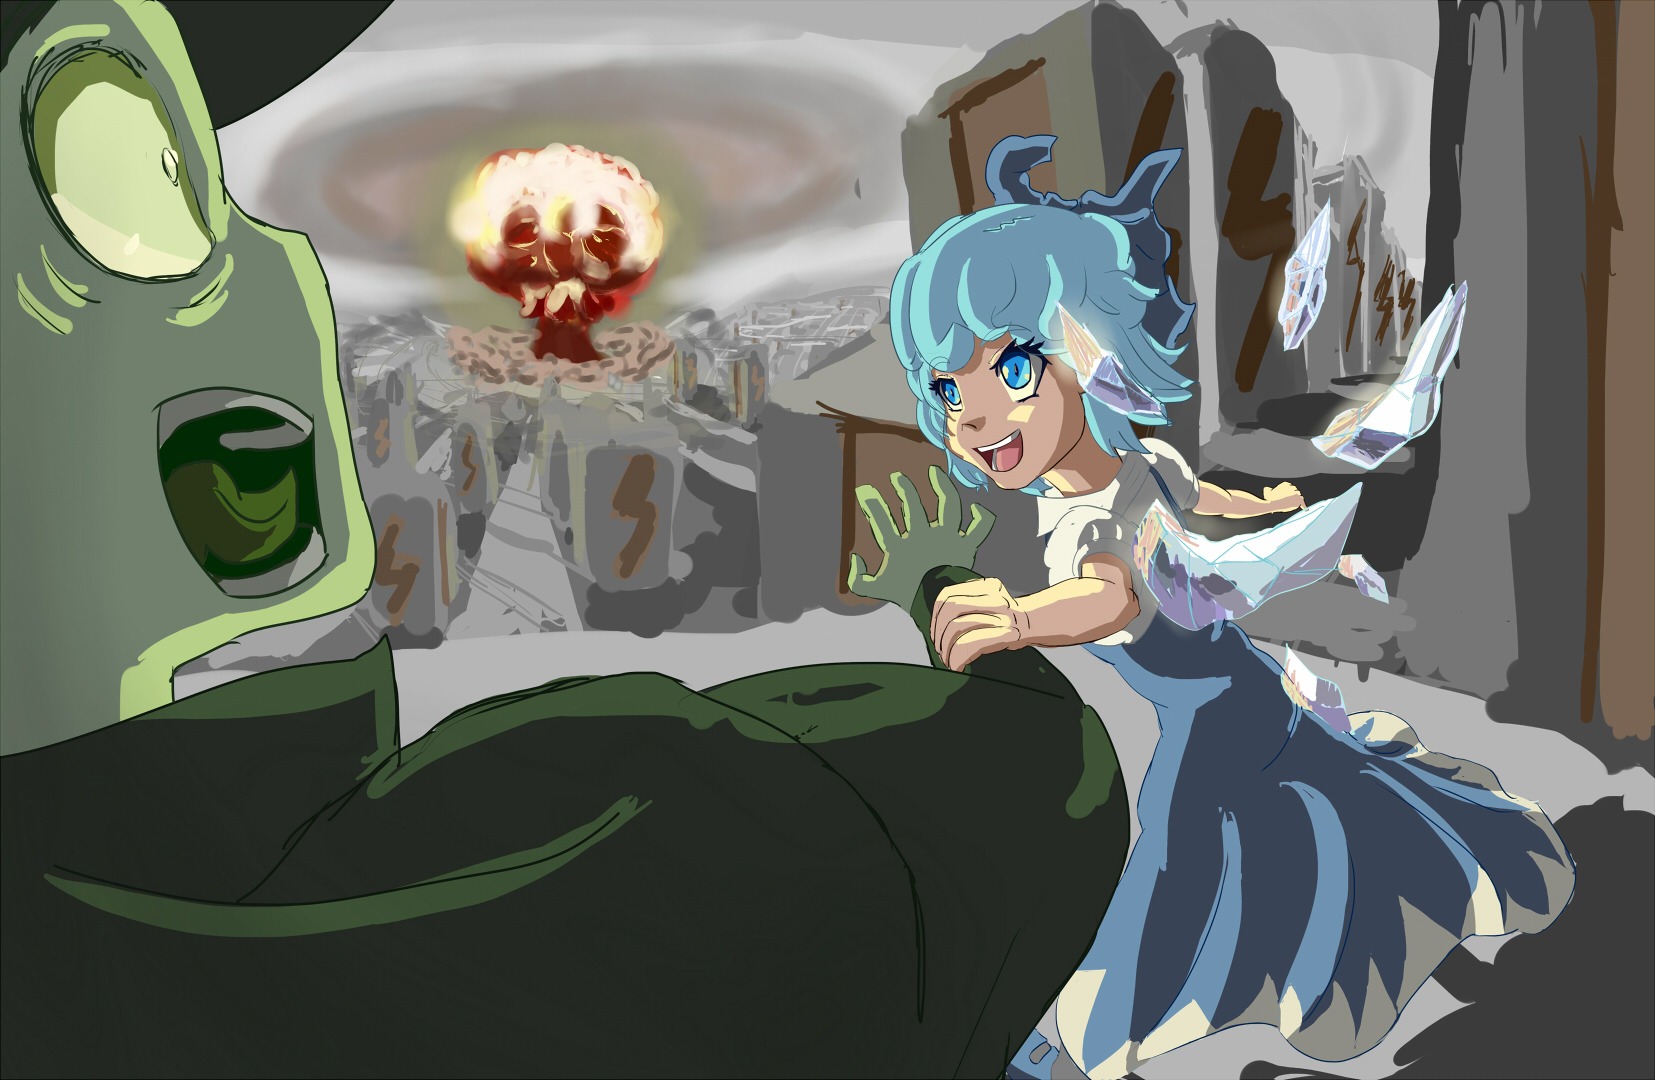 anonymous blue_eyes blue_hair bow cirno city dress explosion green_skin holding_hands mushroom_cloud shocked short_hair wings